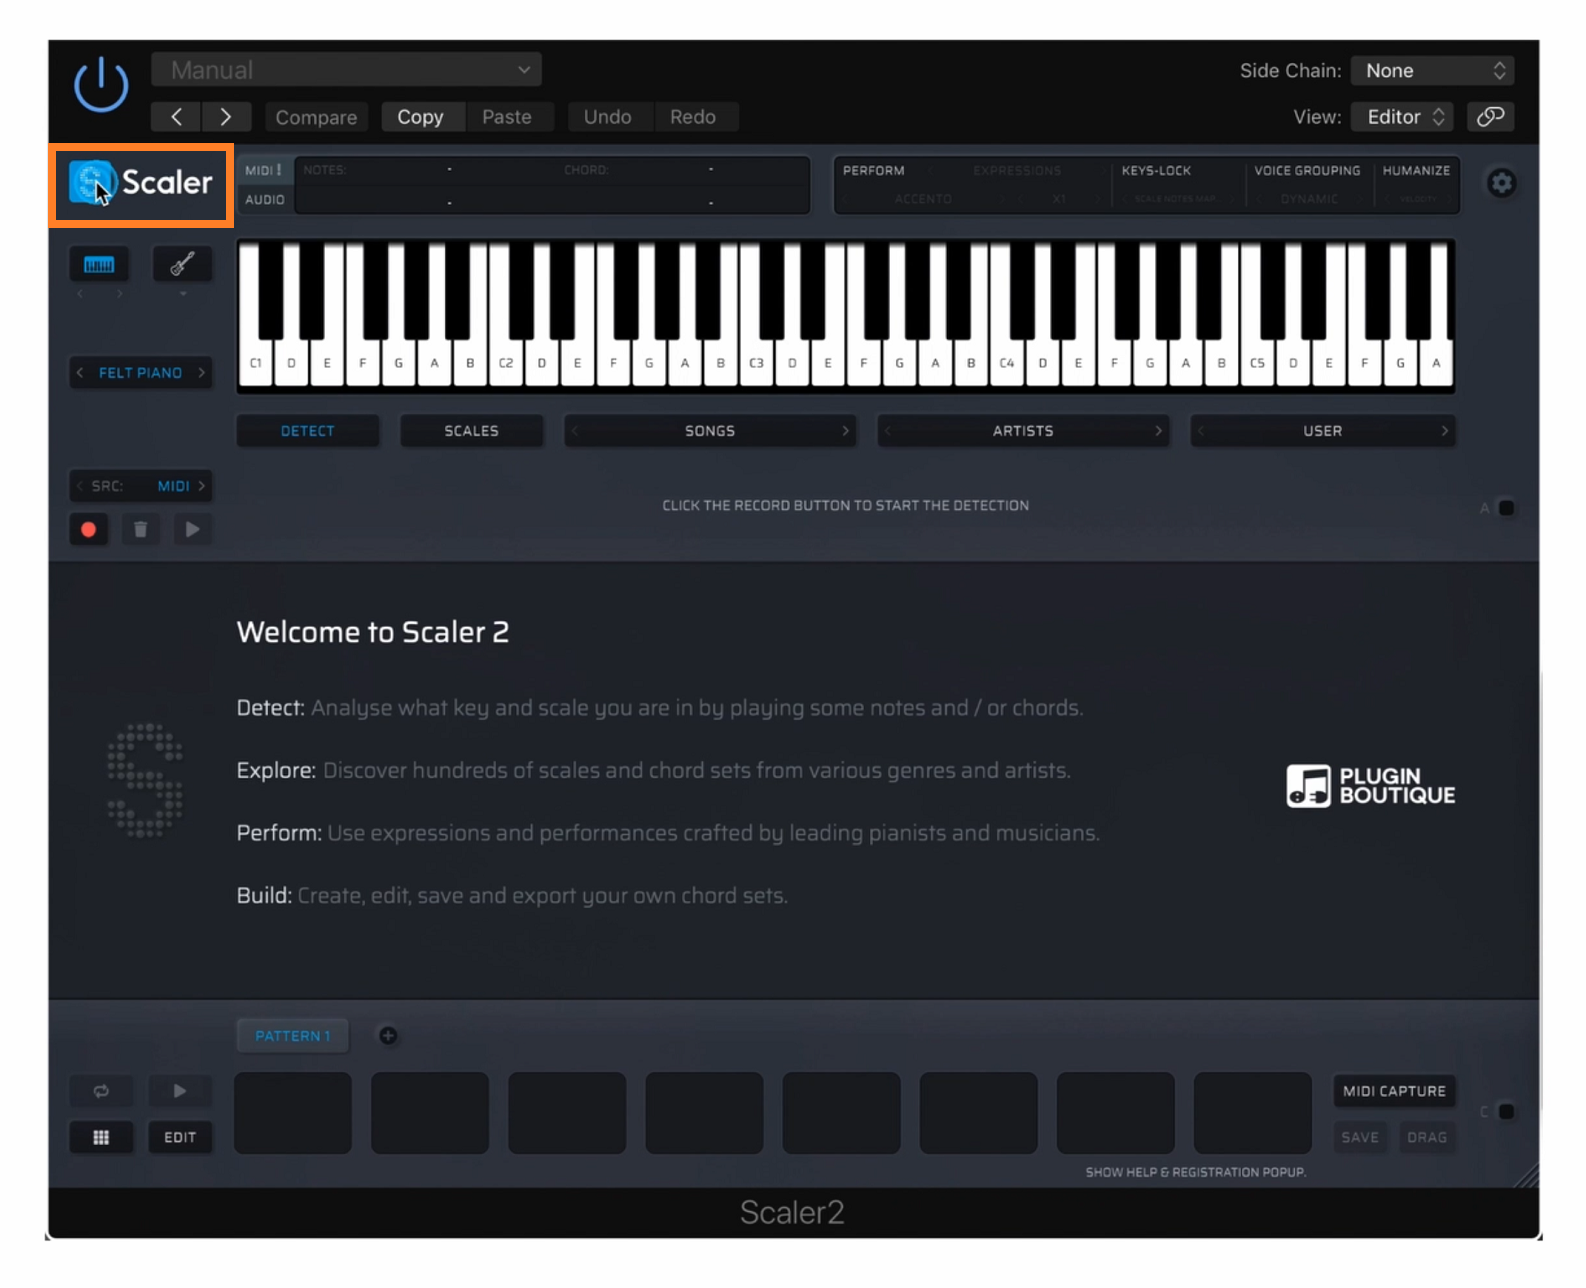 Plugin Boutique Scaler 2.8.1 download the new version for android